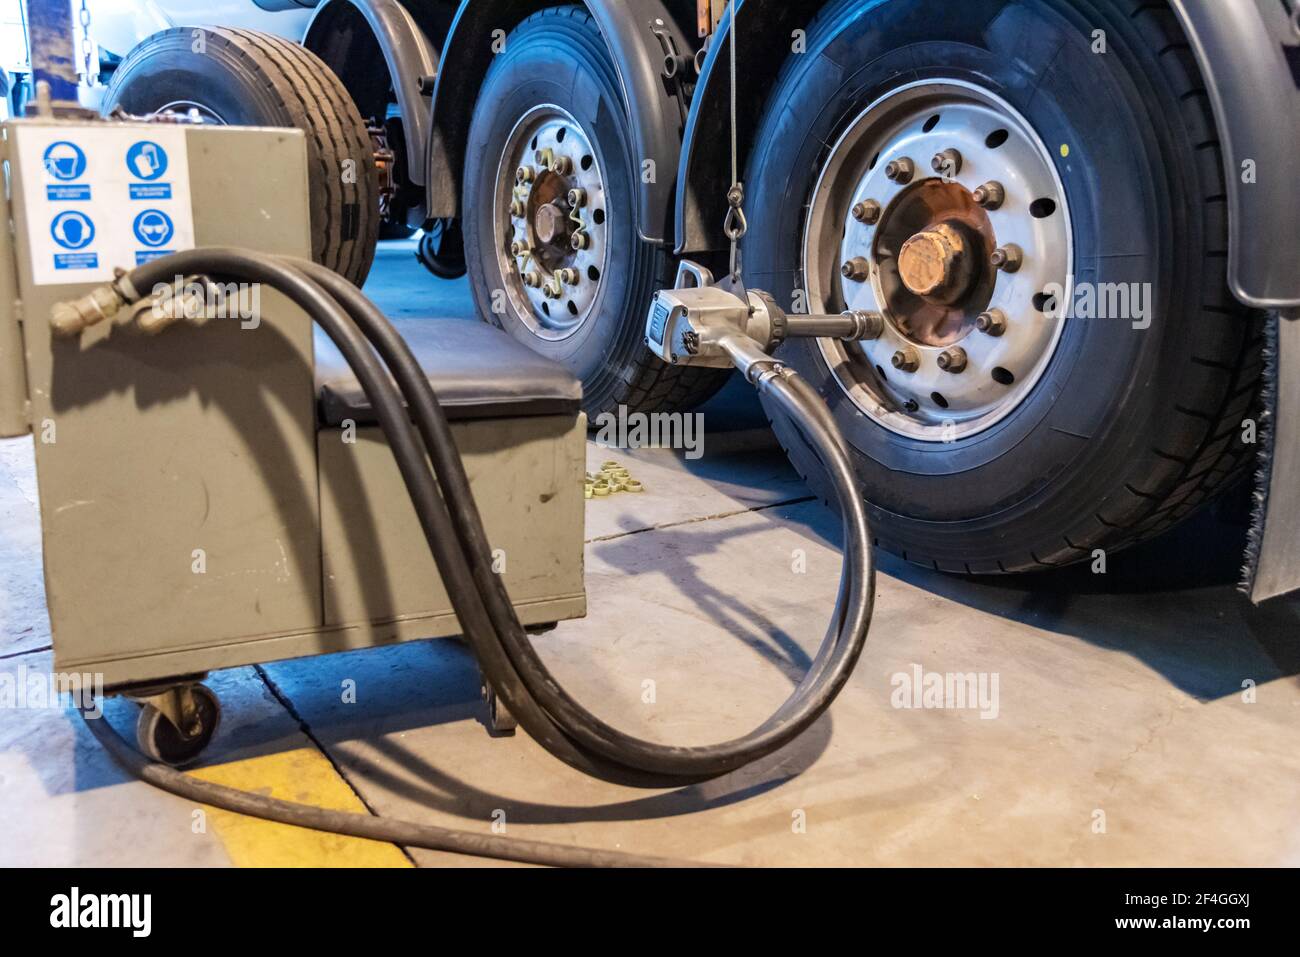 Pneumatic machine to tighten or loosen the lug nuts of a truck. Stock Photo